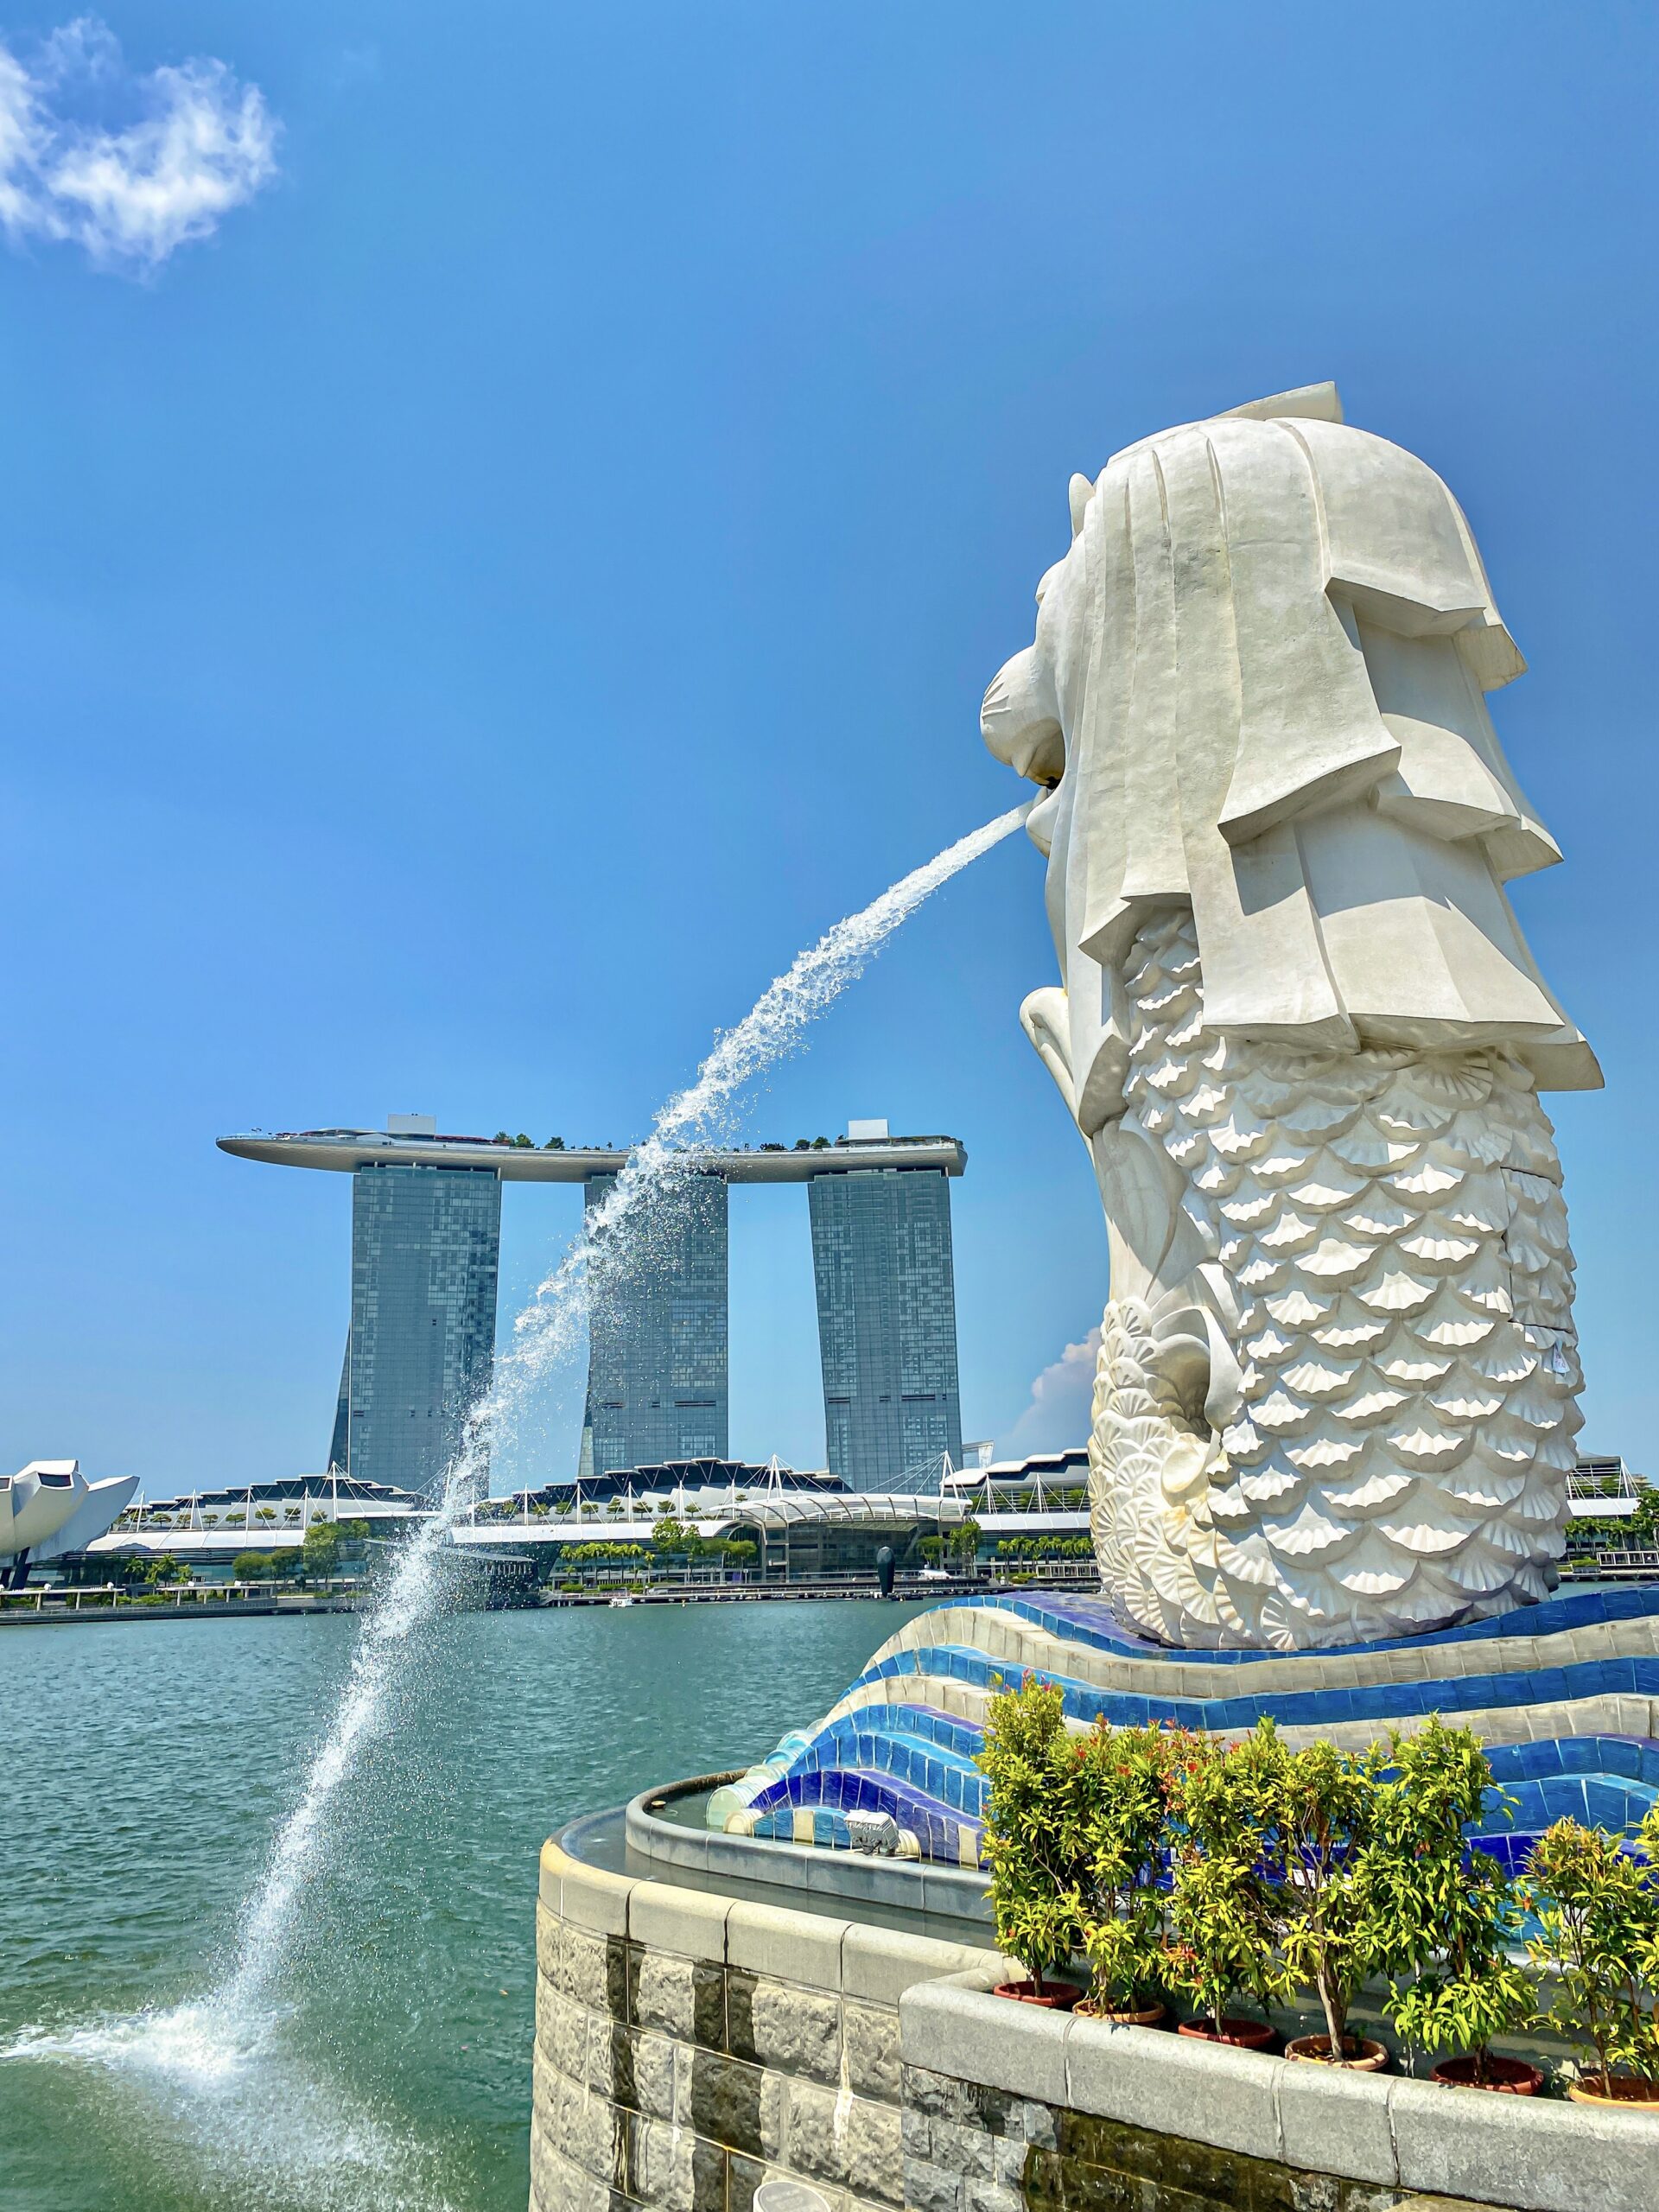 The iconic Merlion statue with Marina Bay Sands in the background. Singapore City